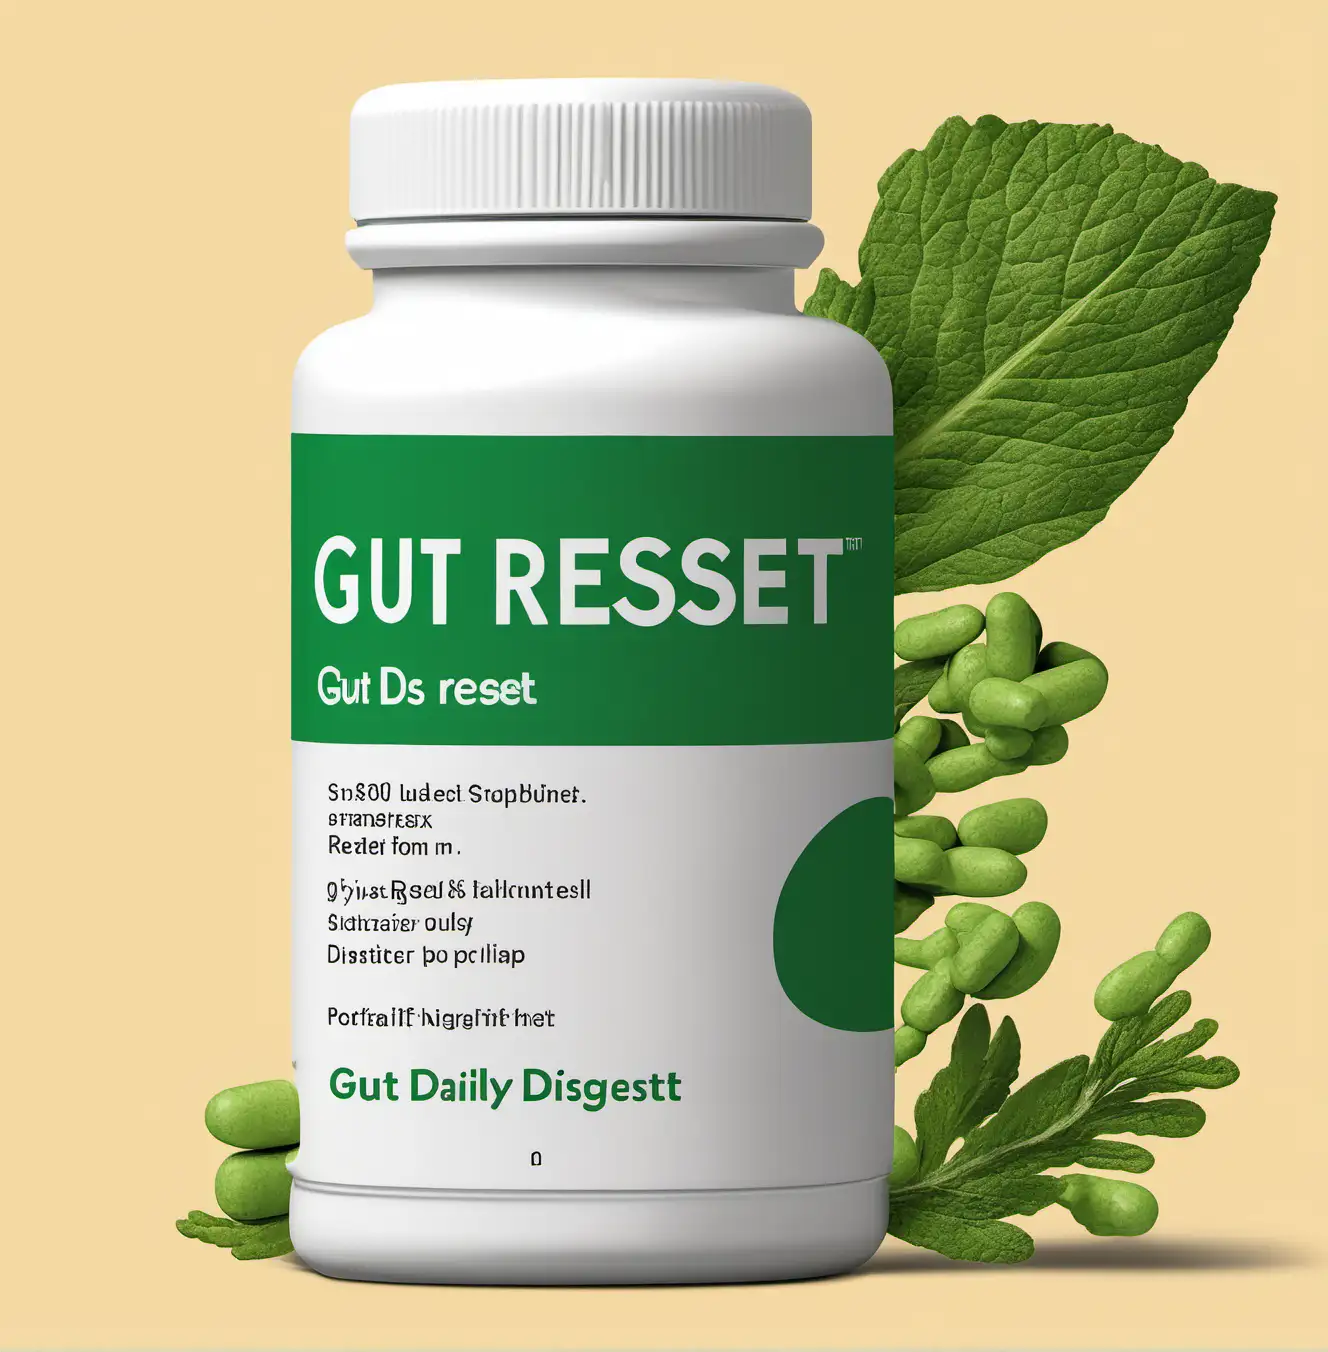 white pill bottle with the brand name "Gut Reset" - a daily digestive supplement with green accent